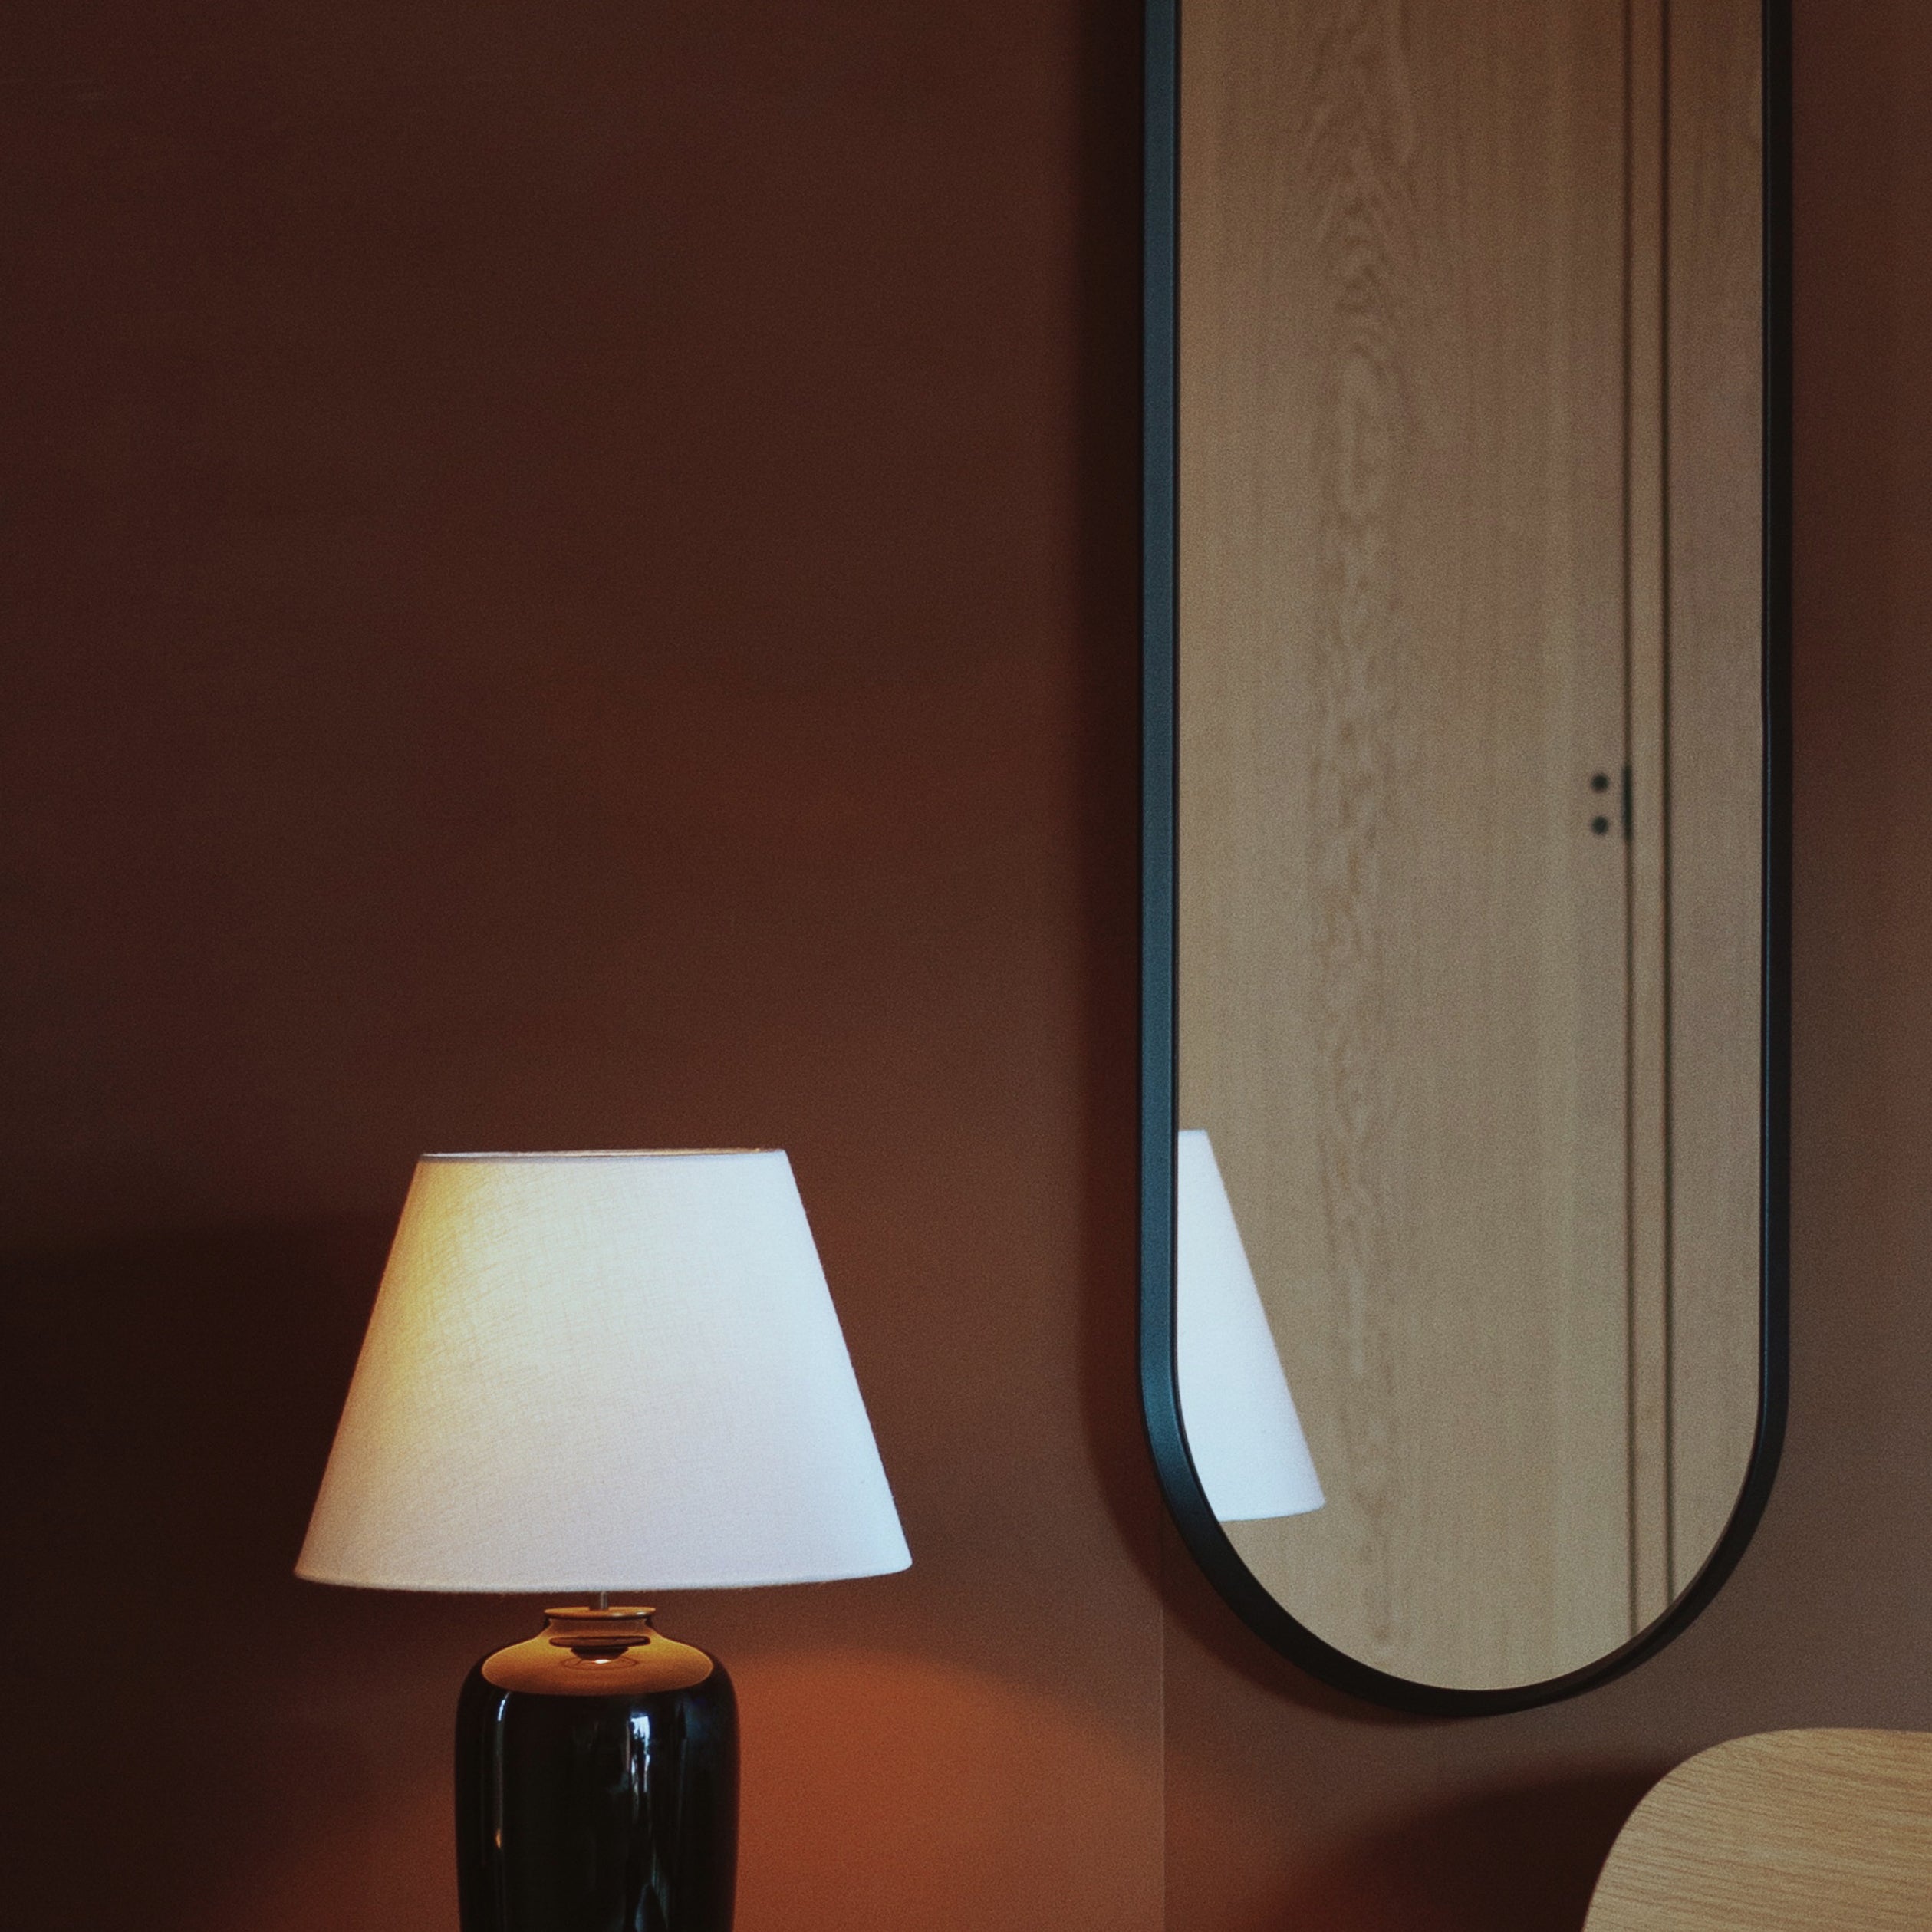 Norm Wall Mirror: Oval